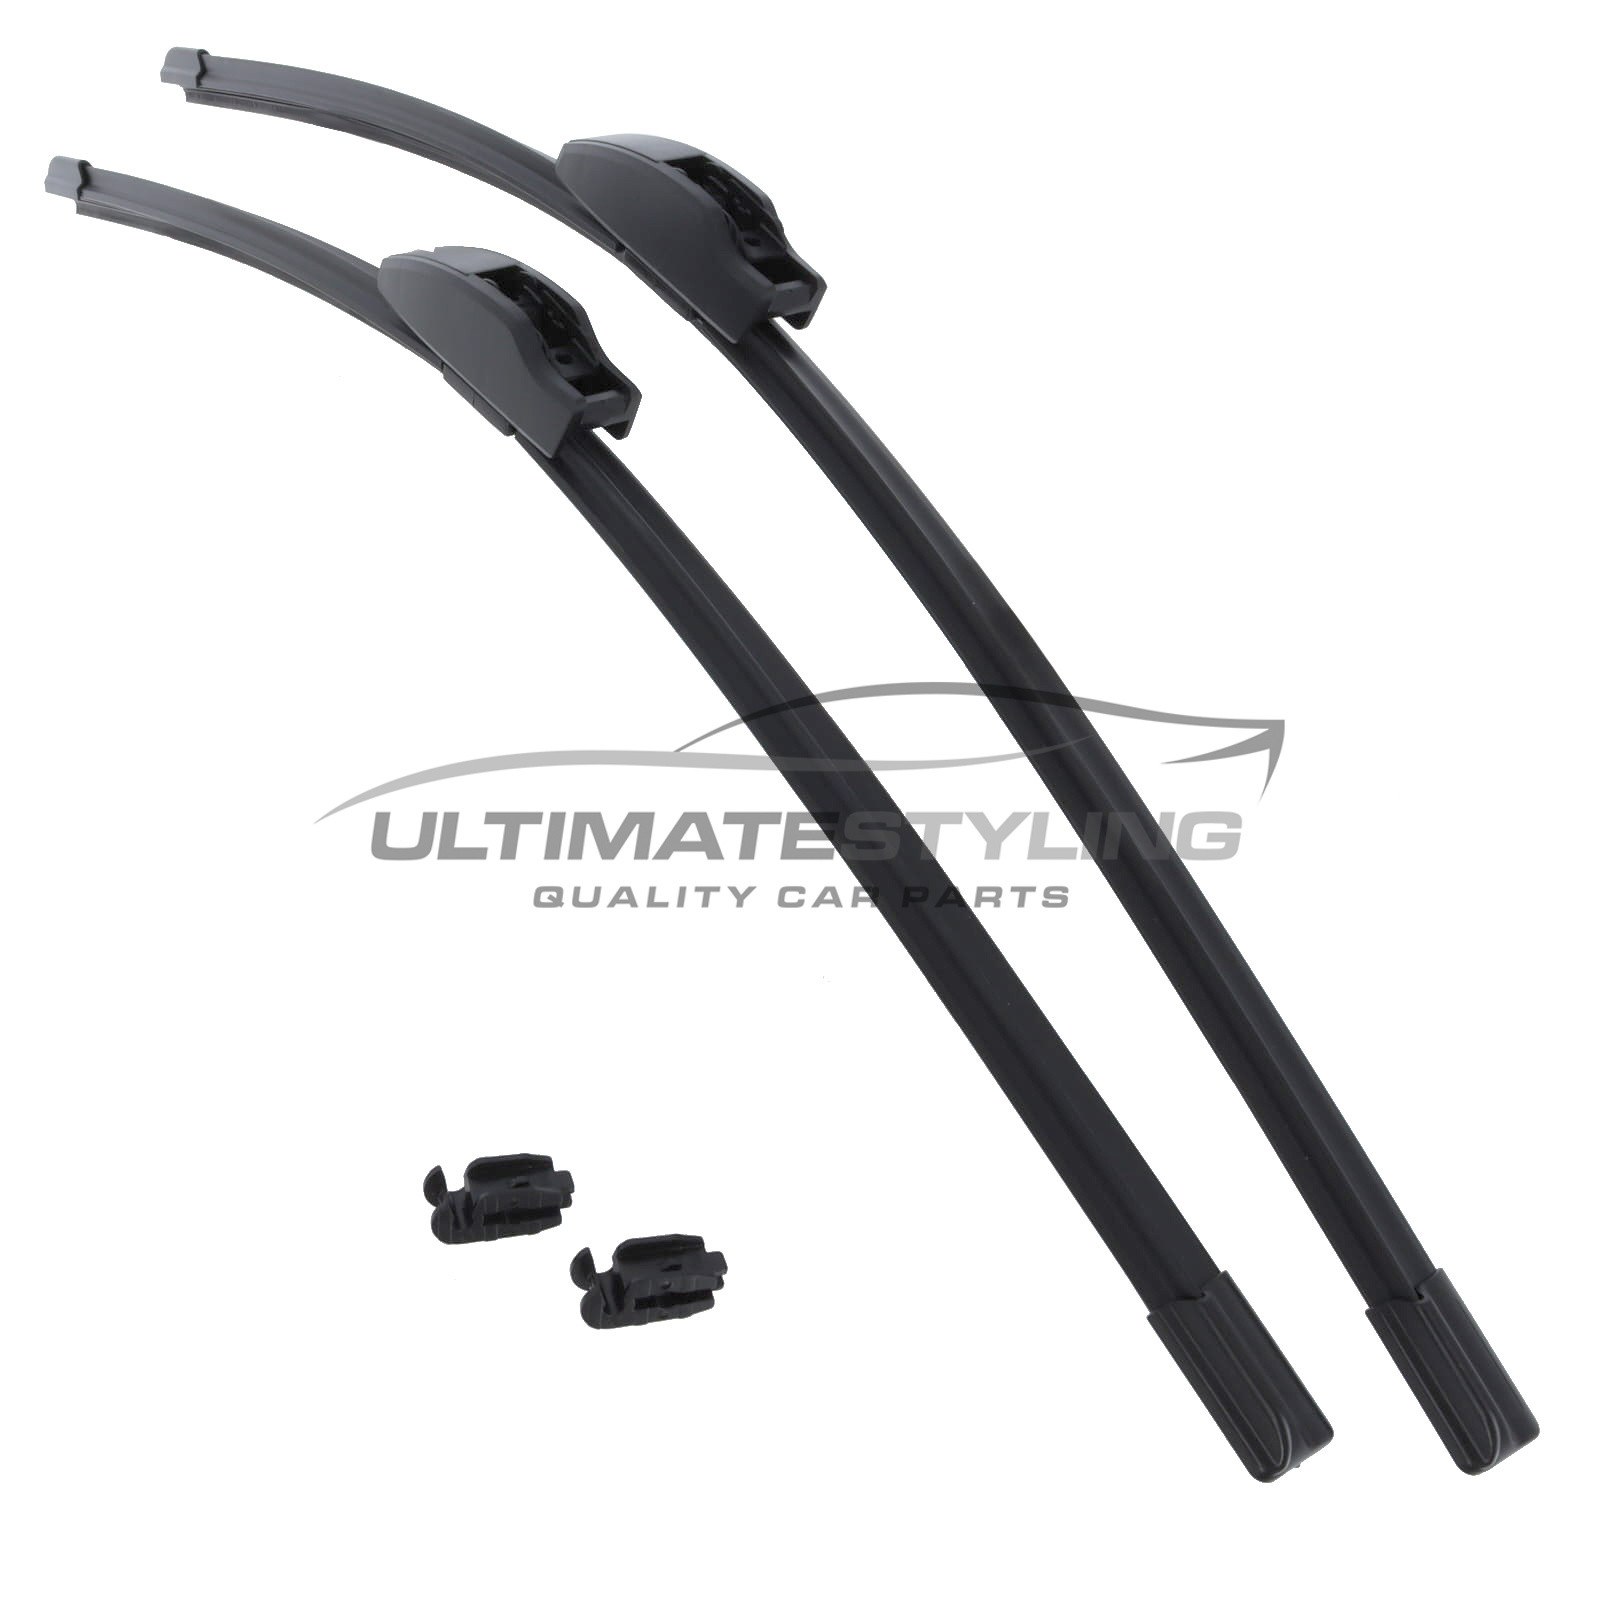 Drivers Side & Passenger Side (Front) Wiper Blades for Honda Accord